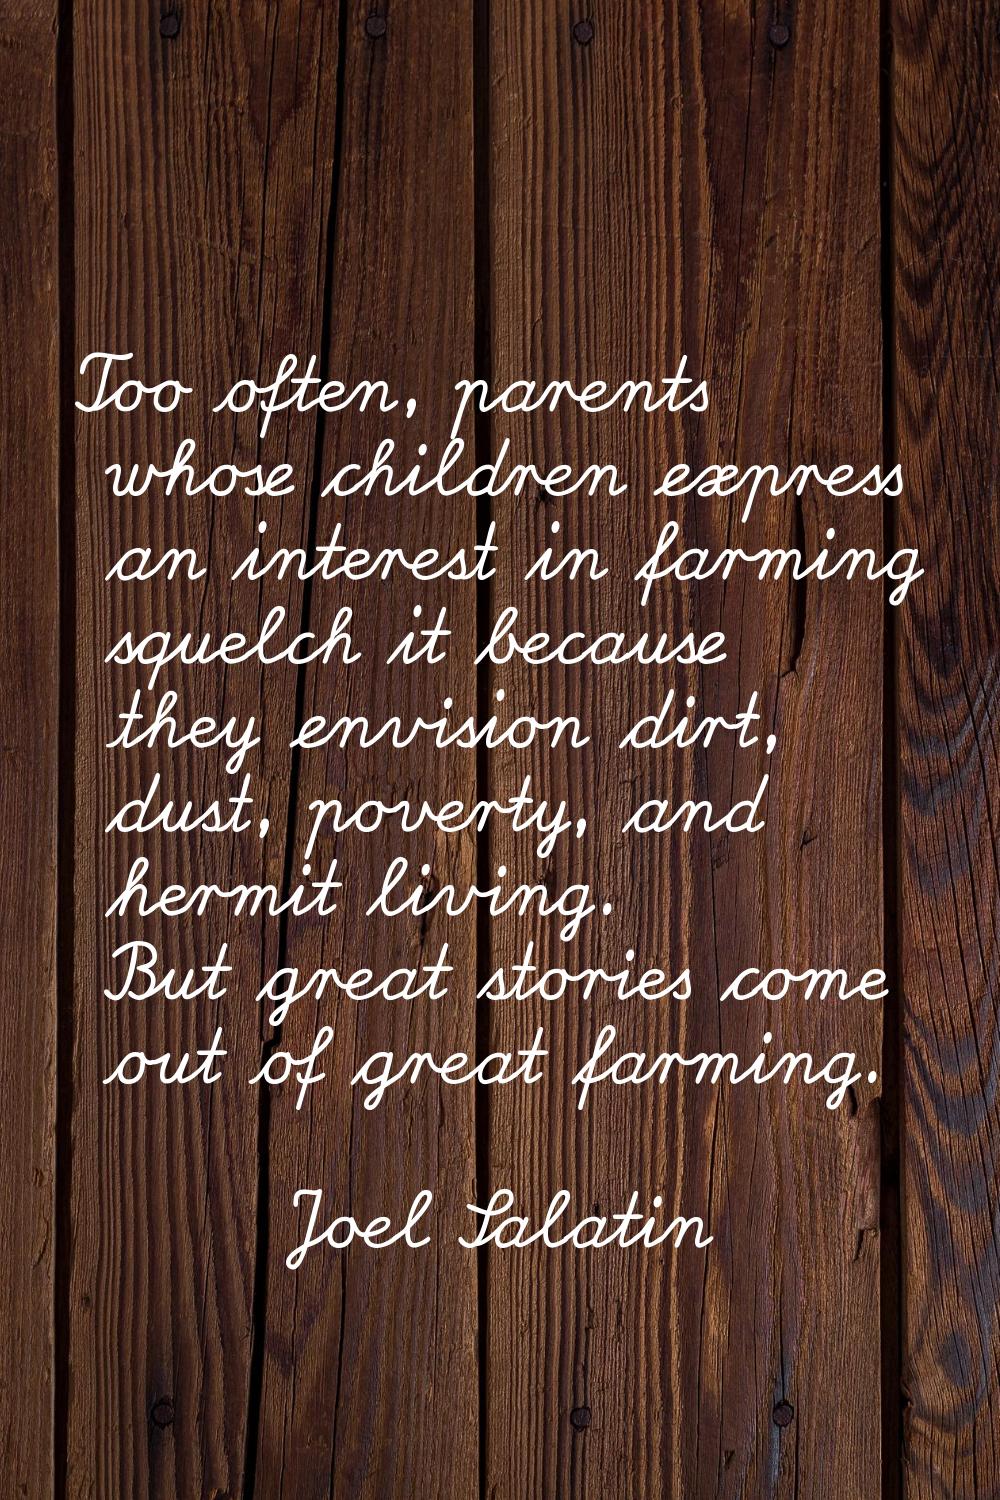 Too often, parents whose children express an interest in farming squelch it because they envision d